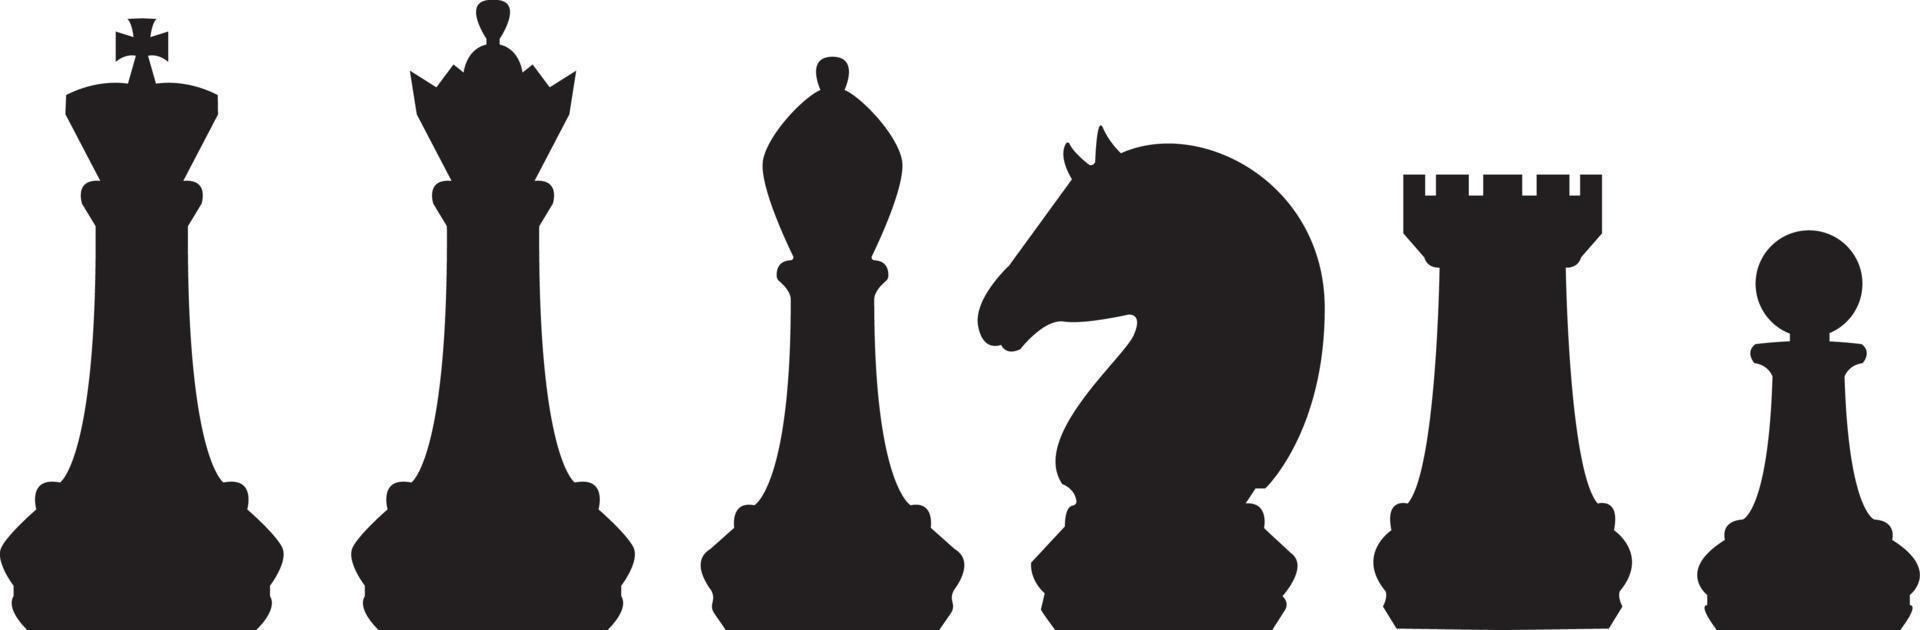 Chess Projects  Photos, videos, logos, illustrations and branding